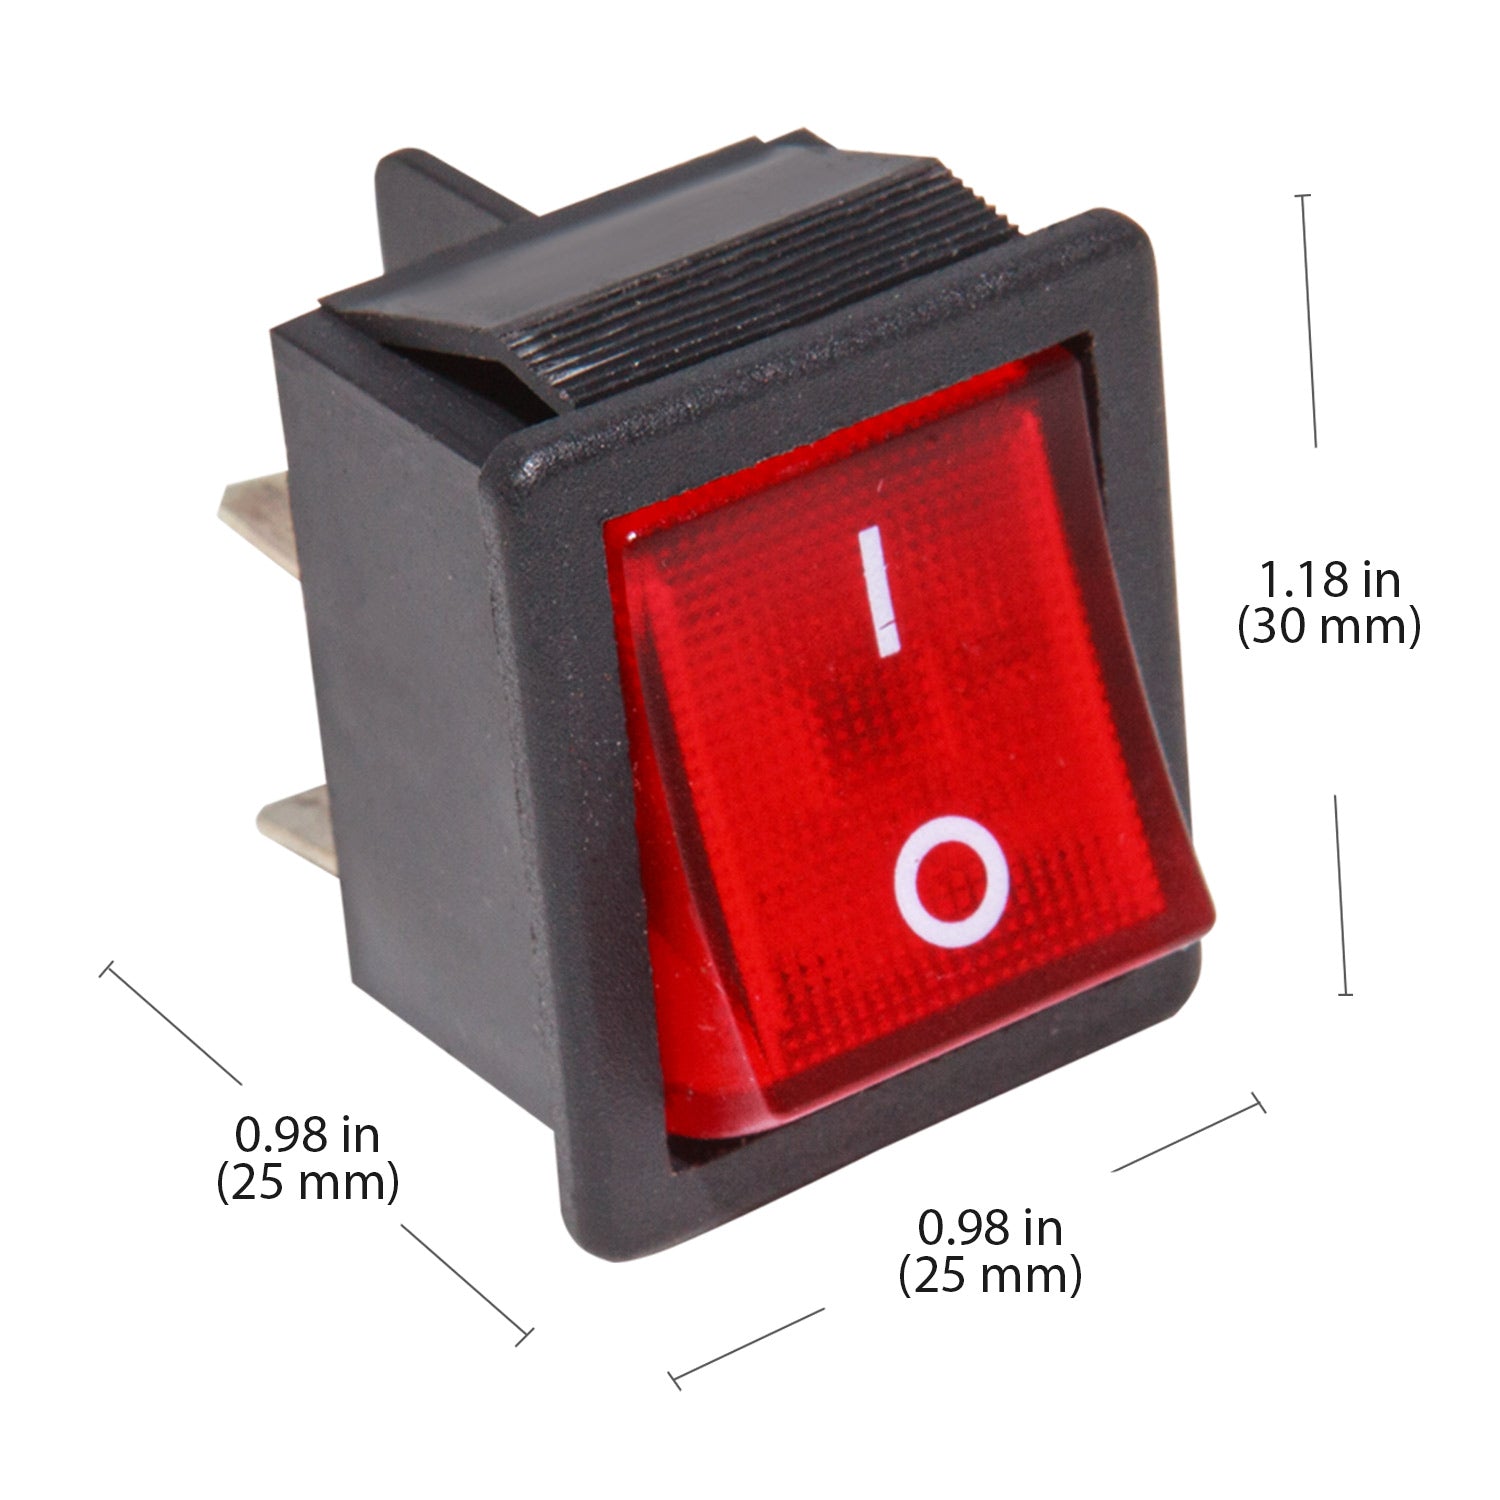 P_SW_1 Power Switch | 4 Pins Rocker On/Off Switch for Kitchen Equipment | 1 PCS